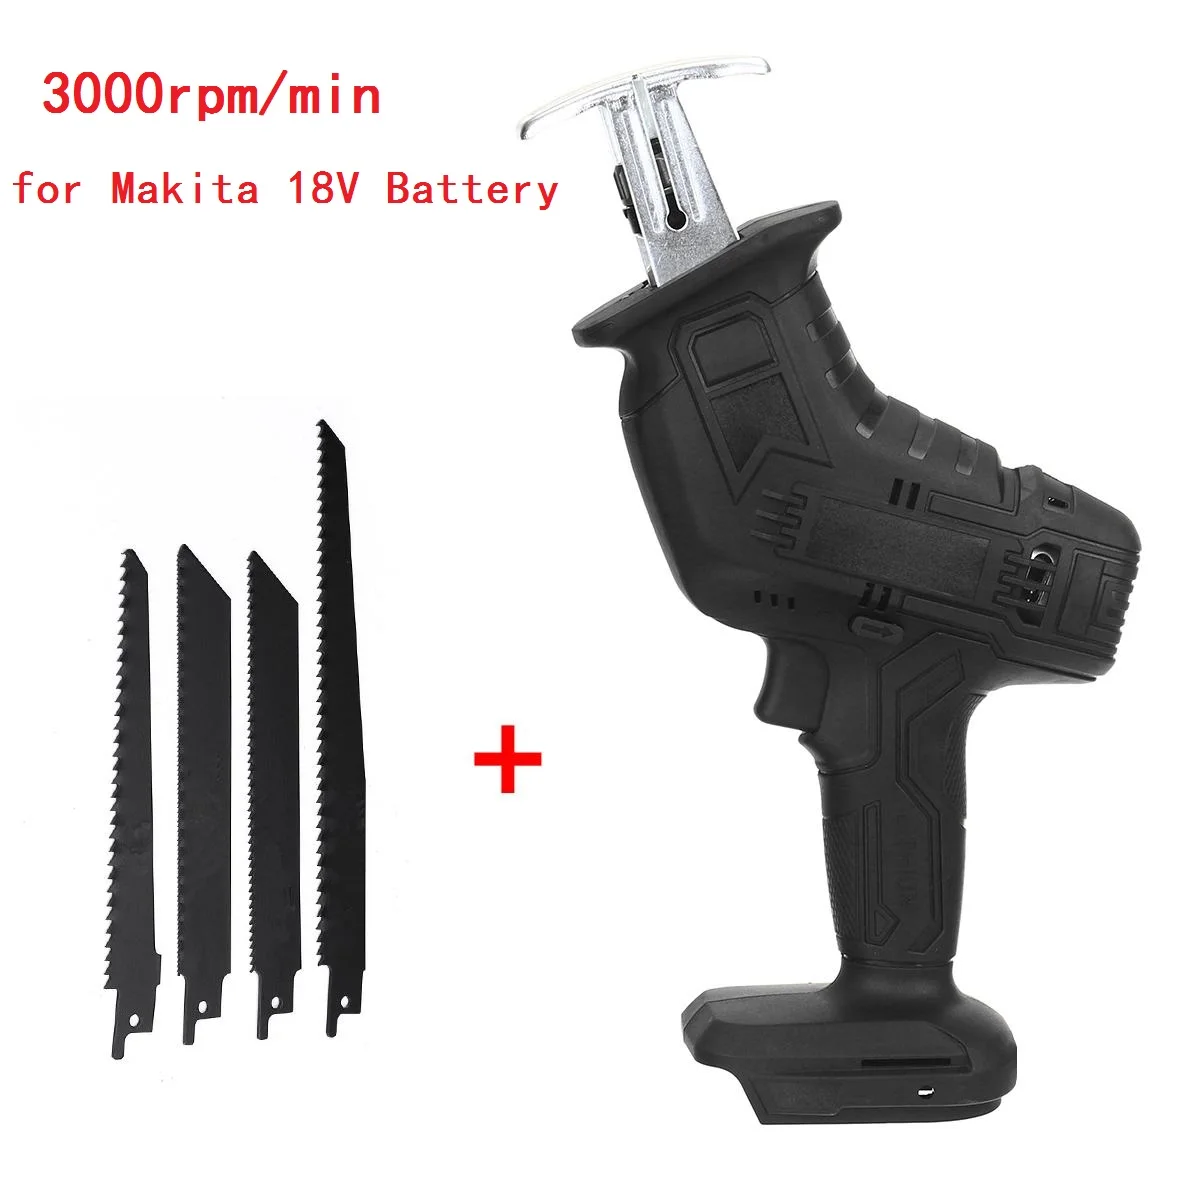 

3000RPM Cordless Electric Reciprocating Saw Saber Cutting For 18V Battery Outdoor Saw + Saw Blade Power Tools Accessories Set